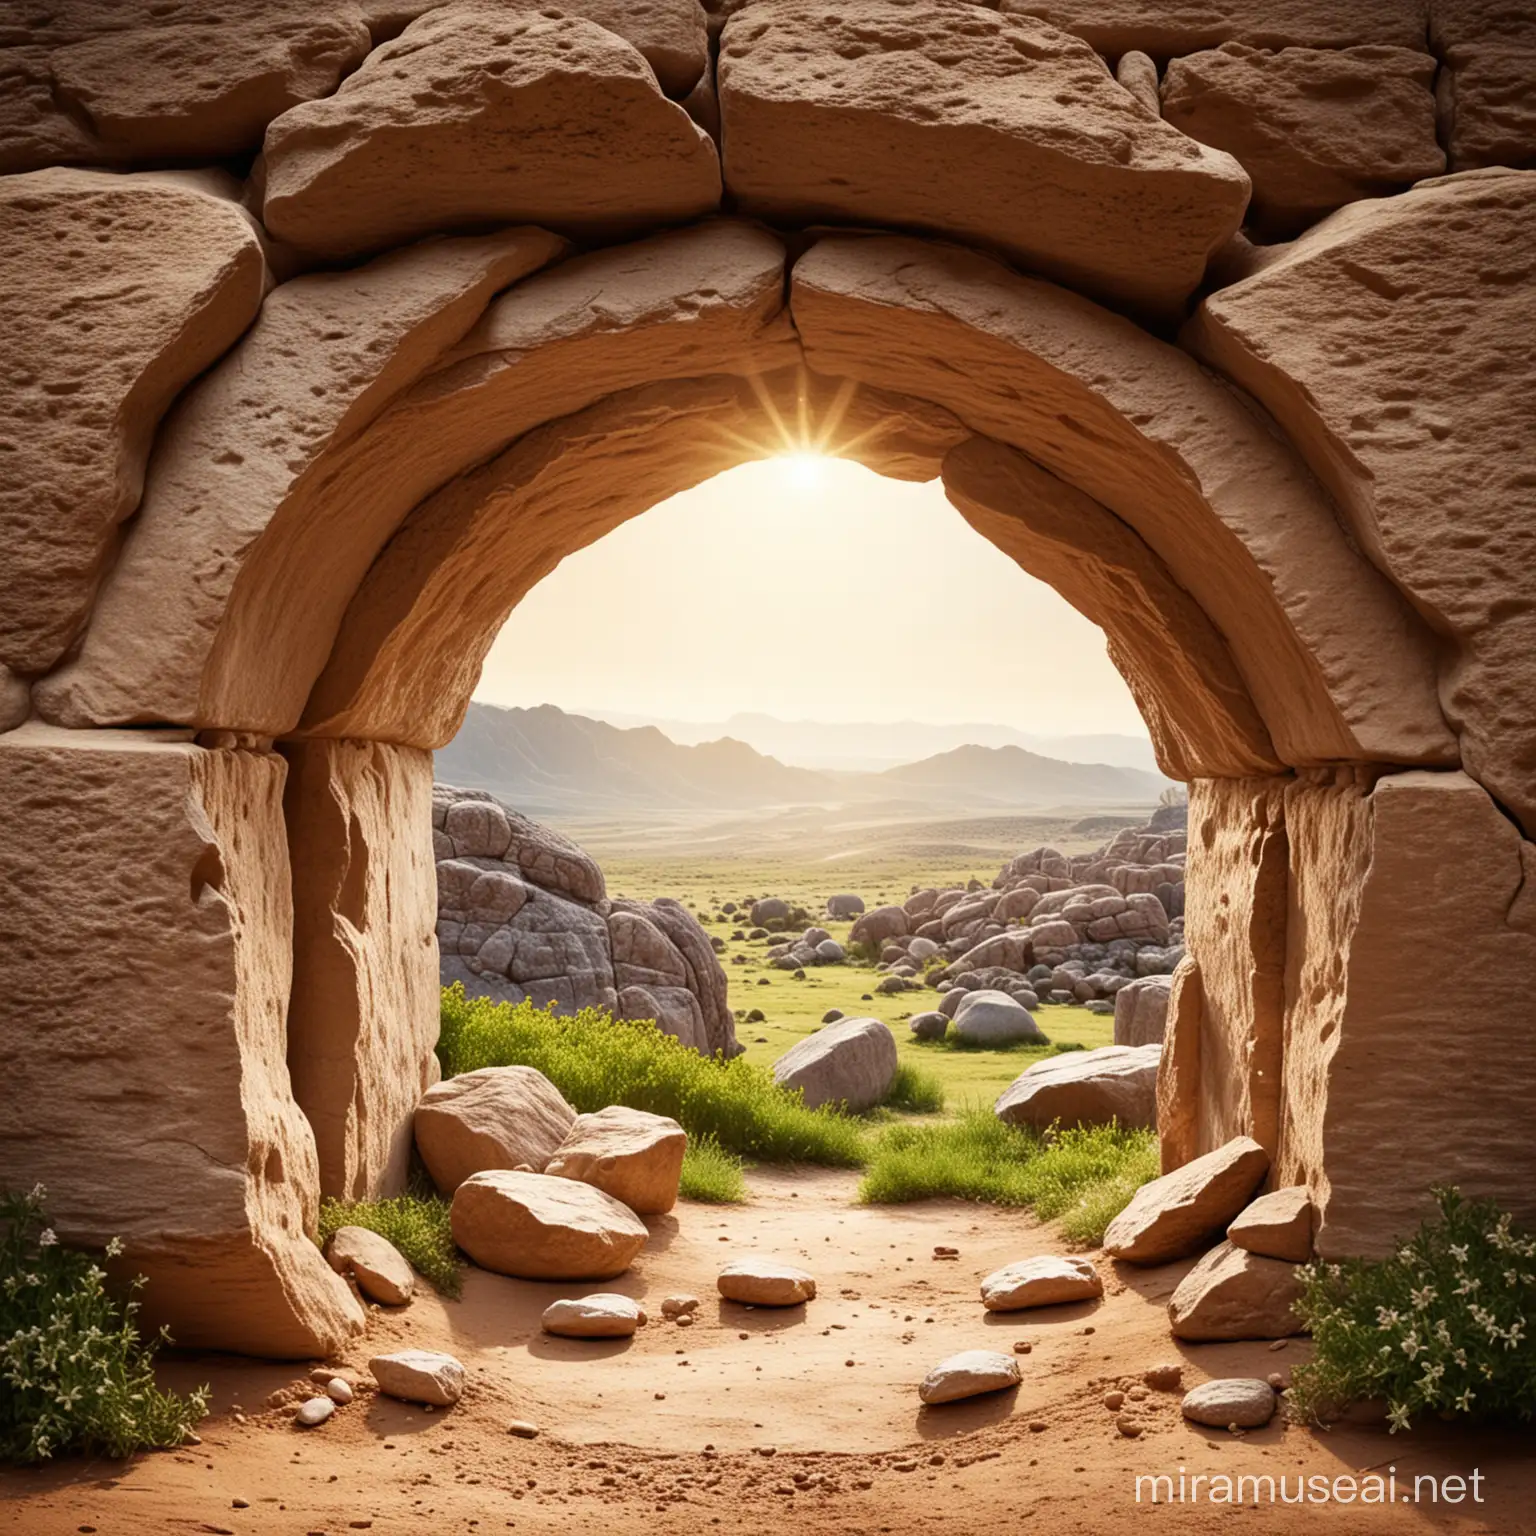 empty tomb with rock 
easter resurrection

